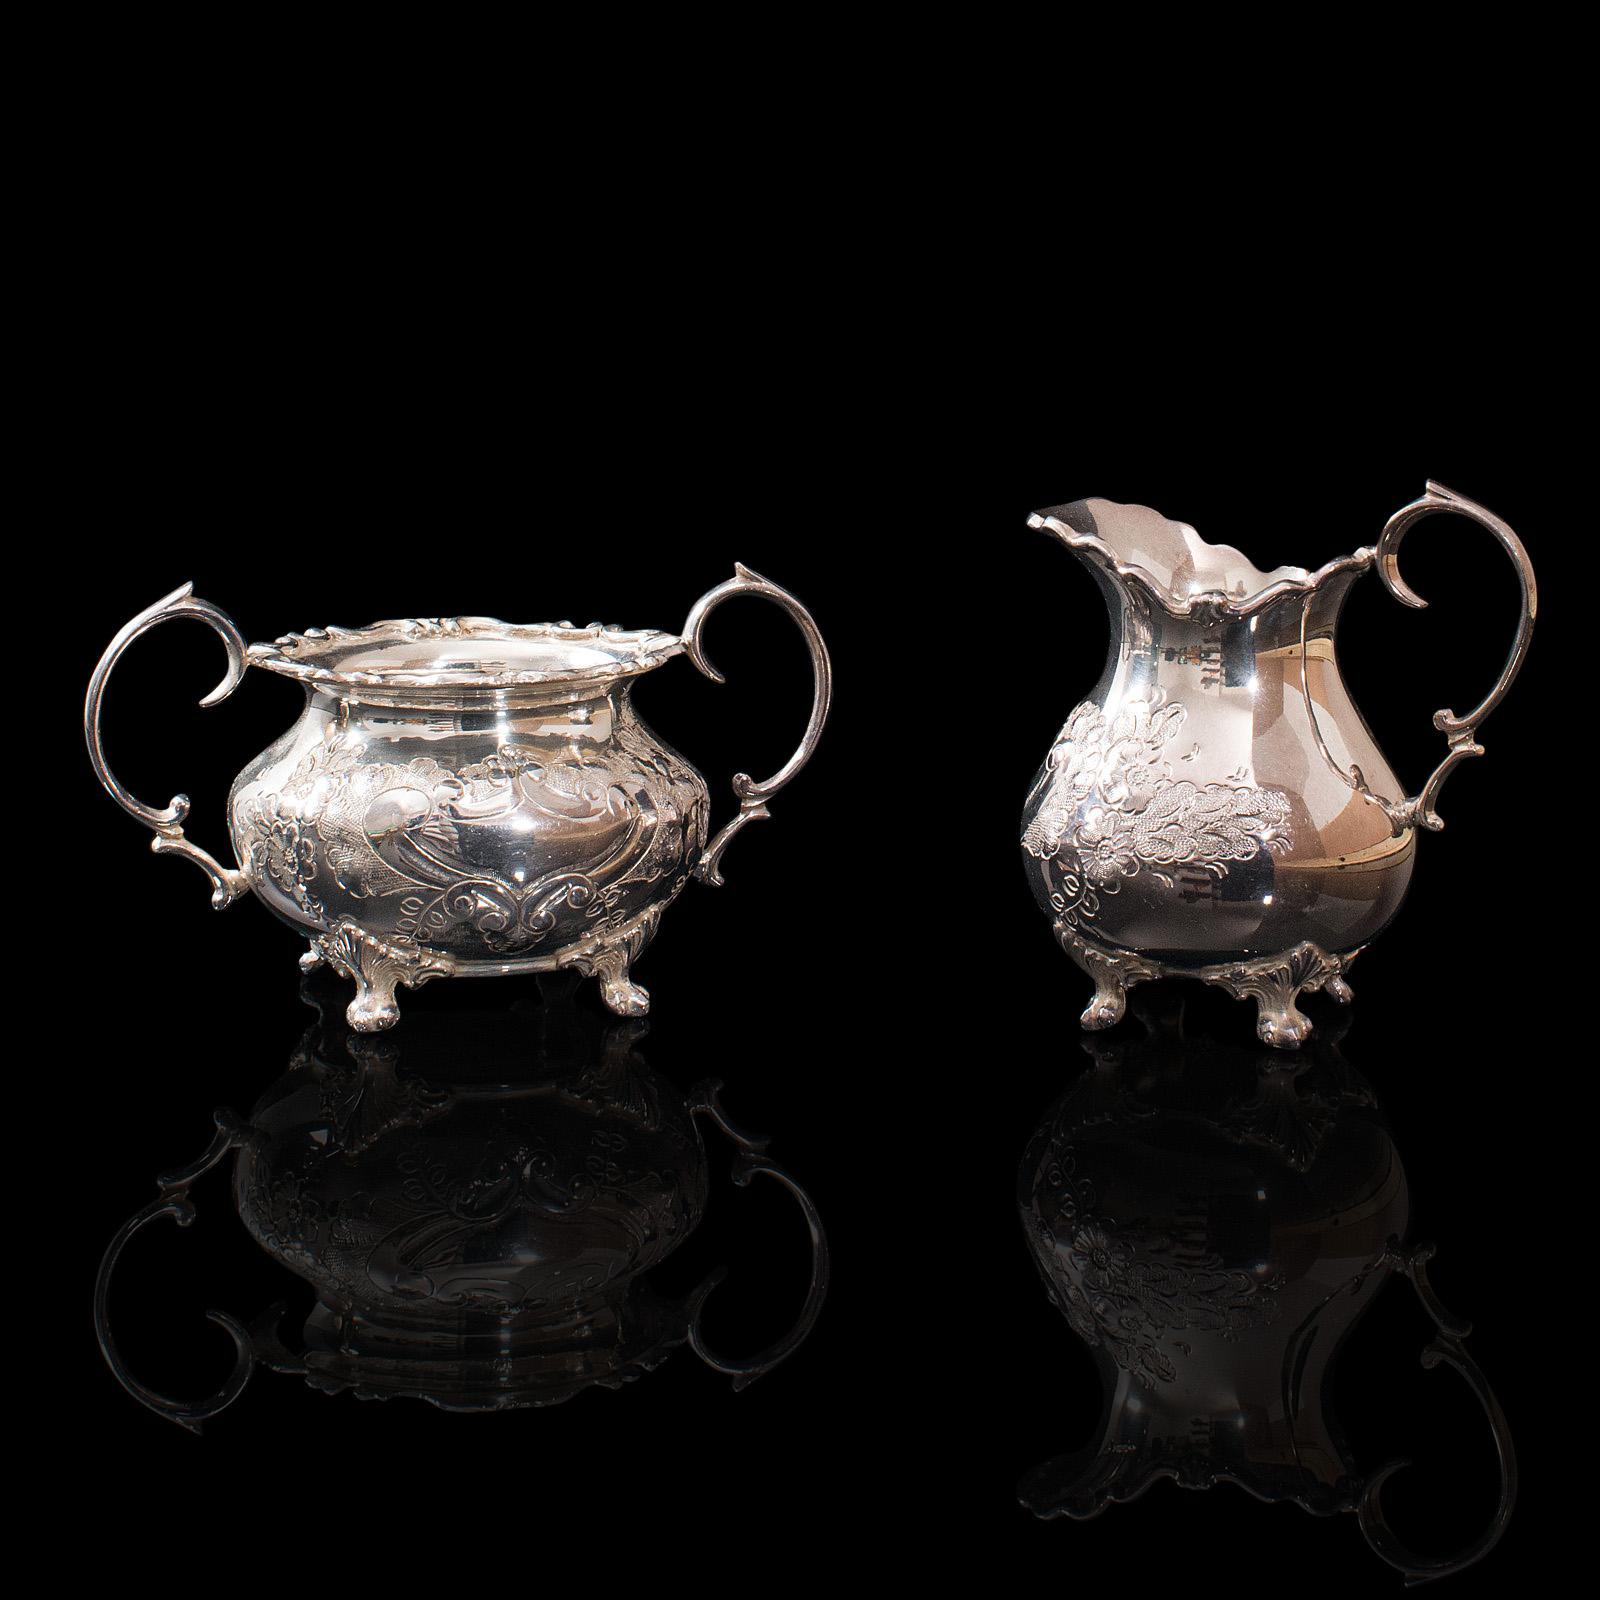 Antique Tea Service, English, Silver Plate, Hand Chased, Teapot, Jug, C.1900 In Good Condition For Sale In Hele, Devon, GB